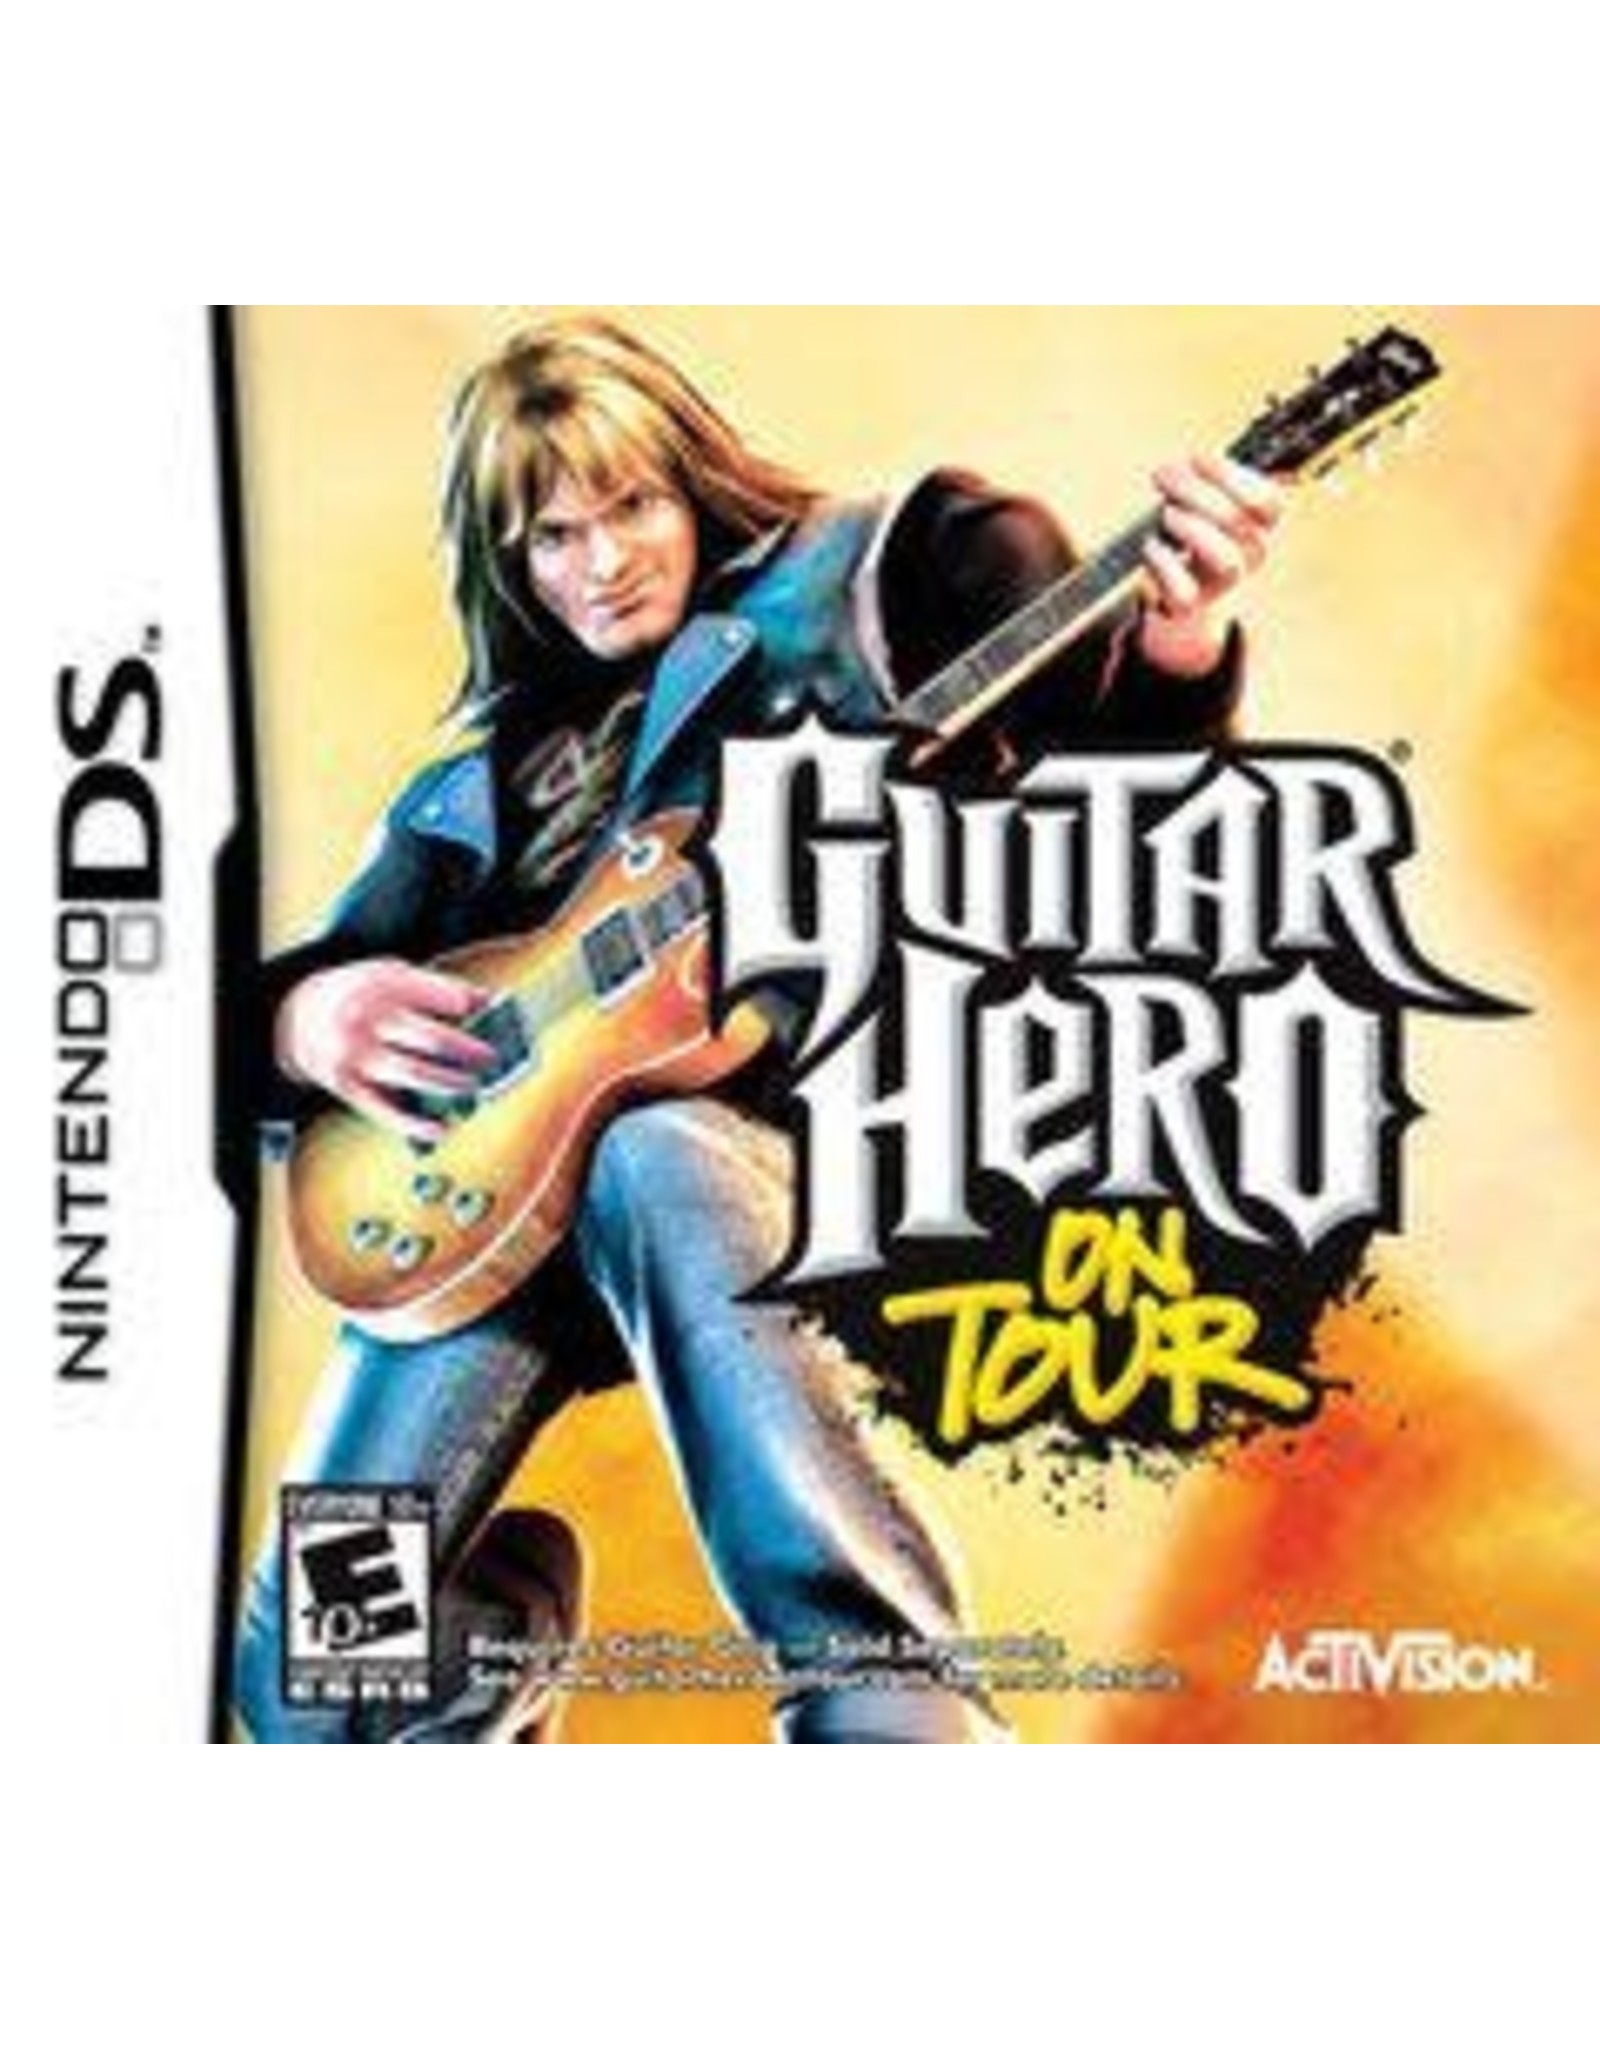 Guitar Hero III Legends Of Rock PC DVD-ROM Game Activision, GAME ONLY -  Sealed